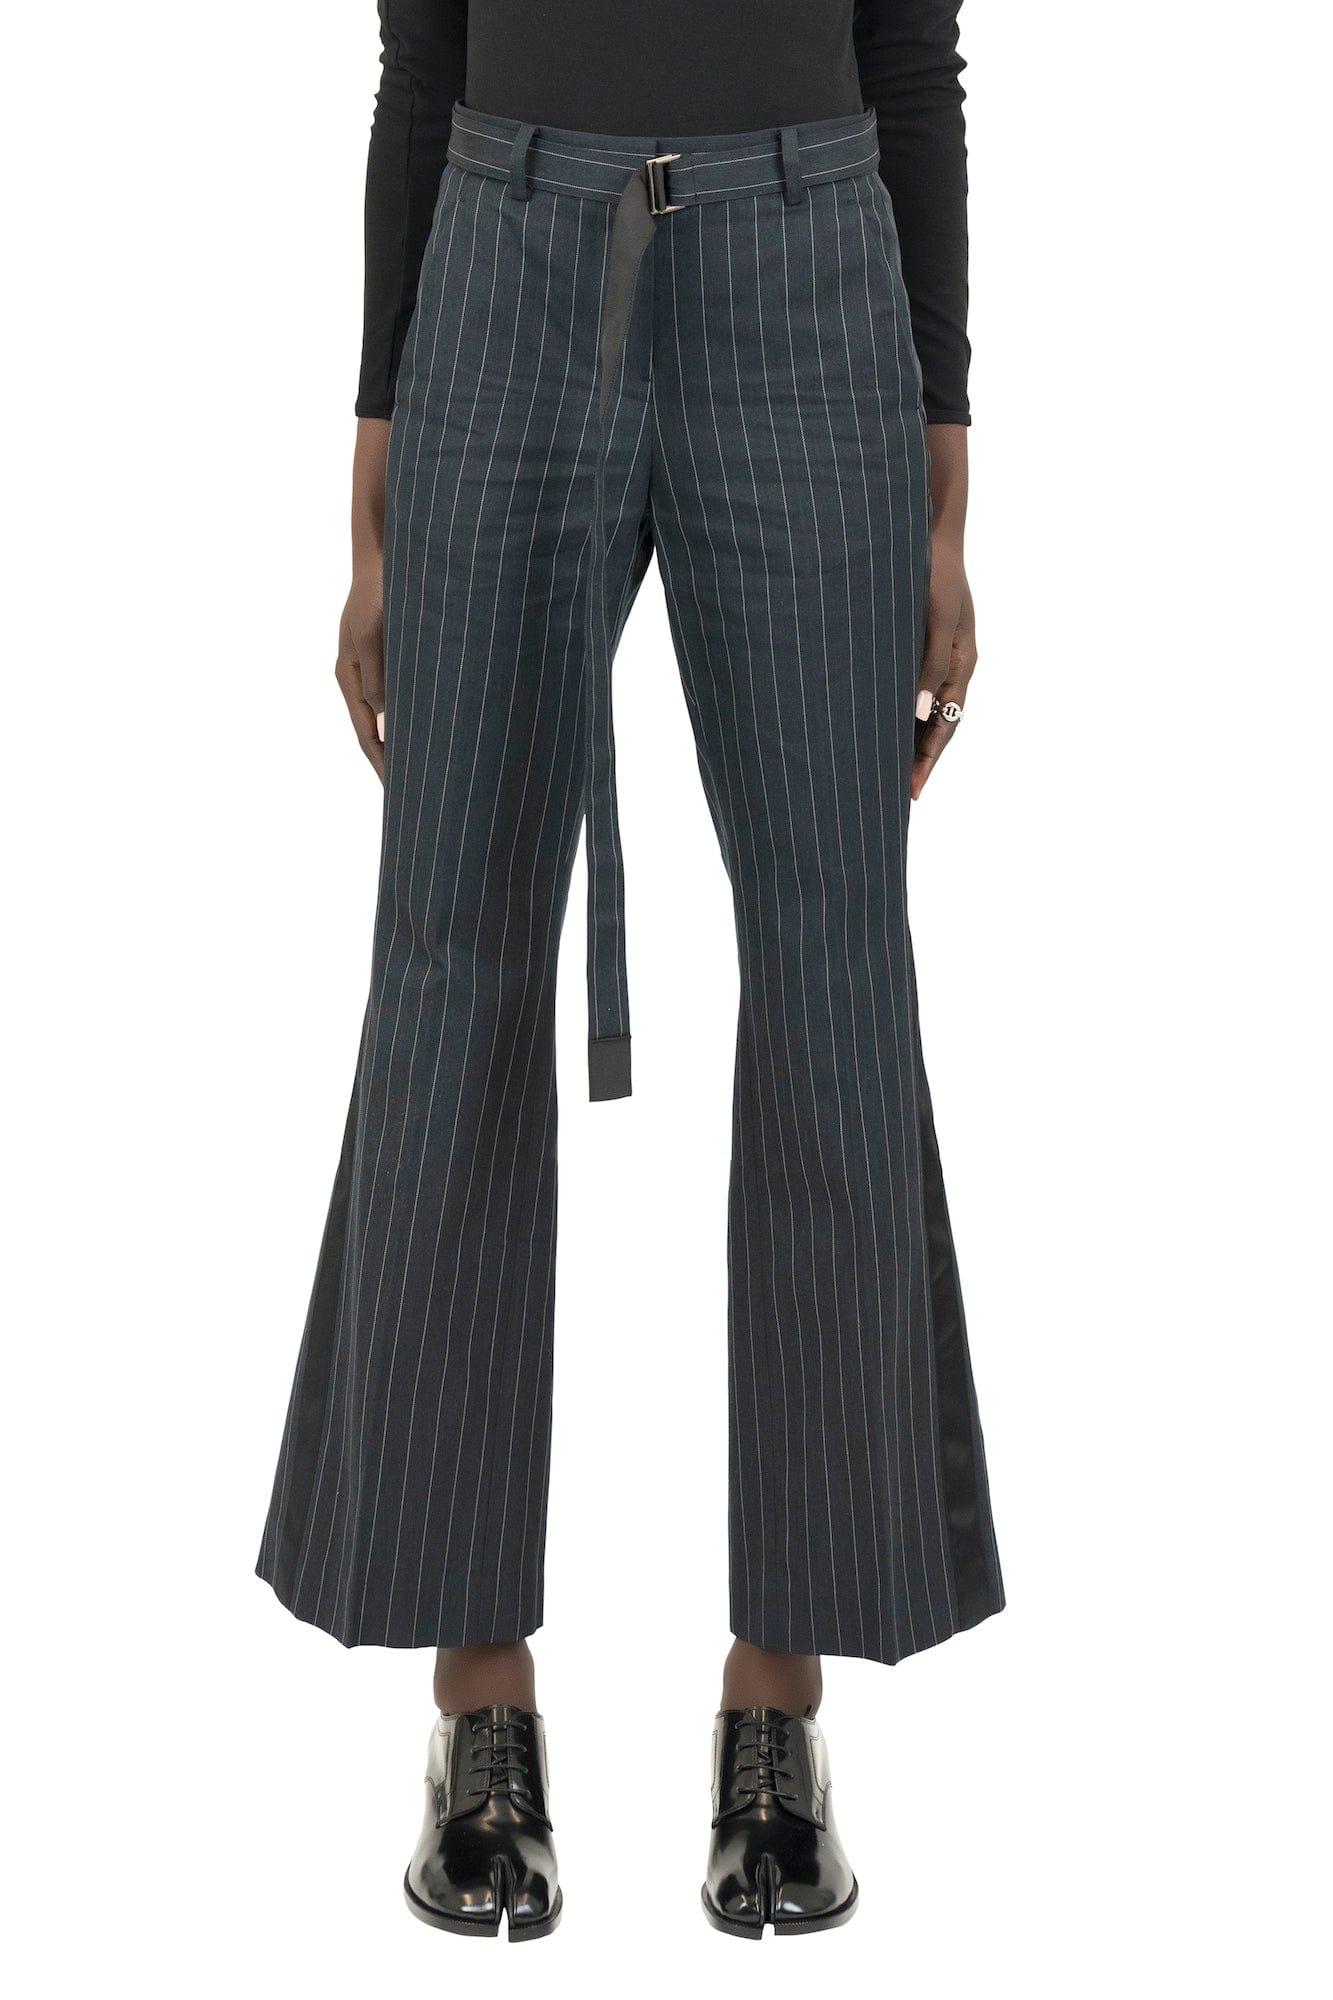 Sacai - CHALK STRIPE PANTS | HBX - Globally Curated Fashion and Lifestyle  by Hypebeast